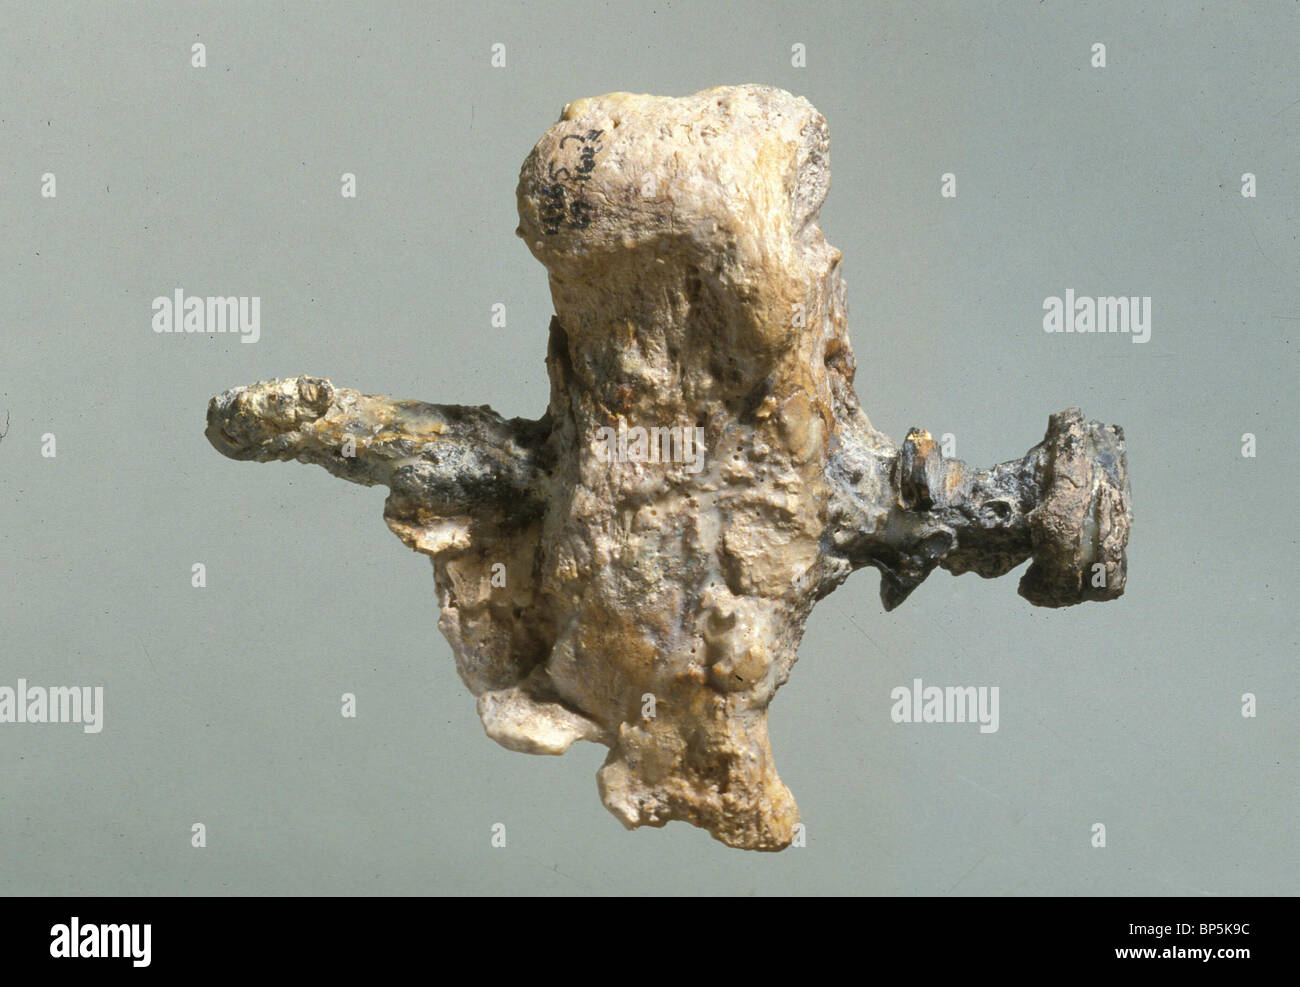 HEELBONE OF A CRUCIFIED MAN WITH THE IRON NAIL THAT PIERCED THE BONE & FASTENED HIM TO THE WOOD. THE BONE WAS FOUND IN AN Stock Photo